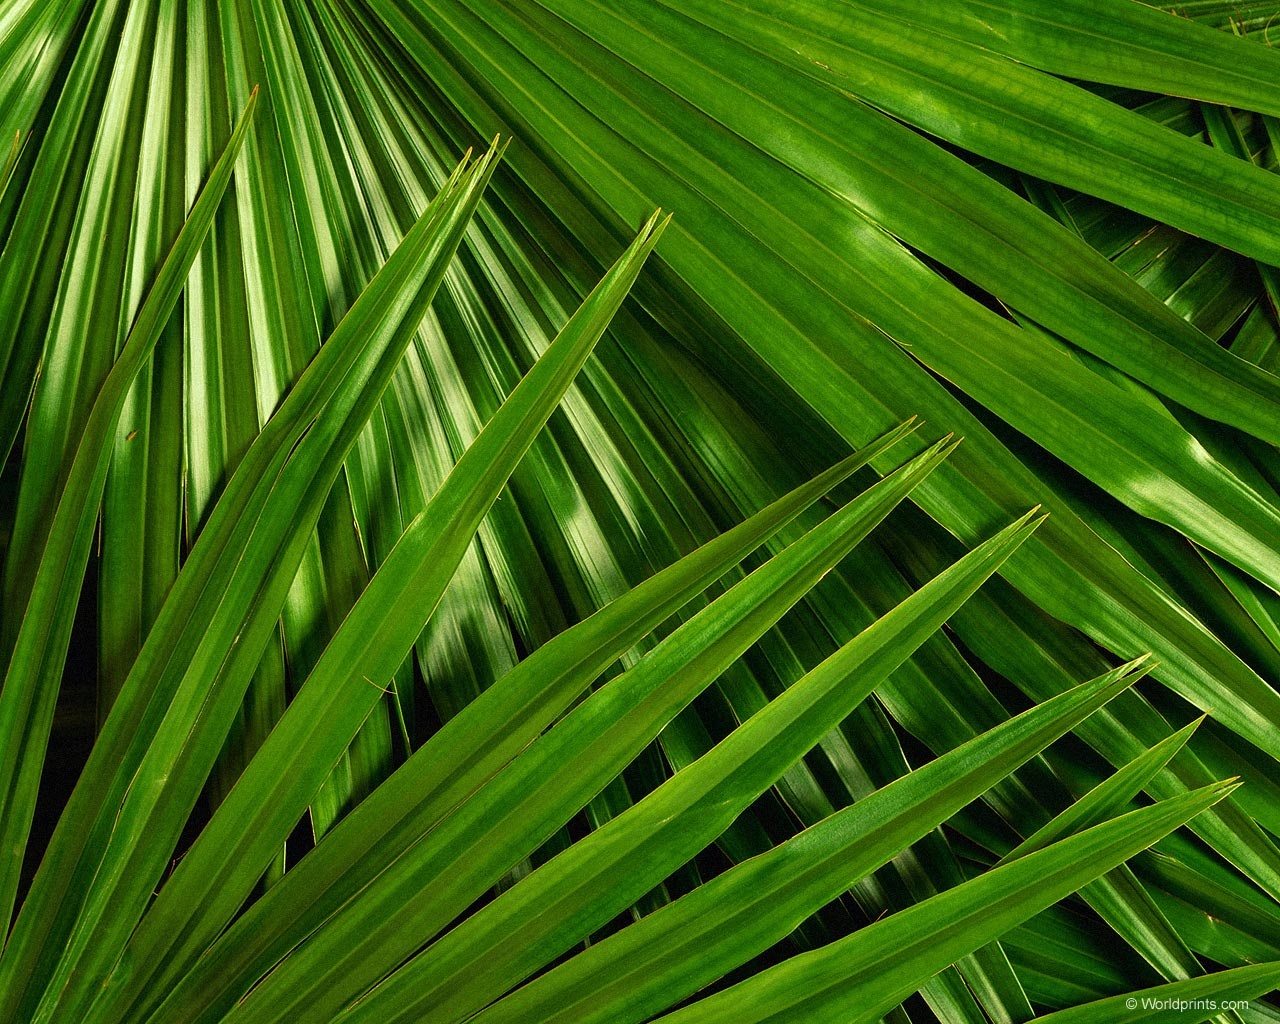 palm leaves WallpaperSuggestcom wallpapers